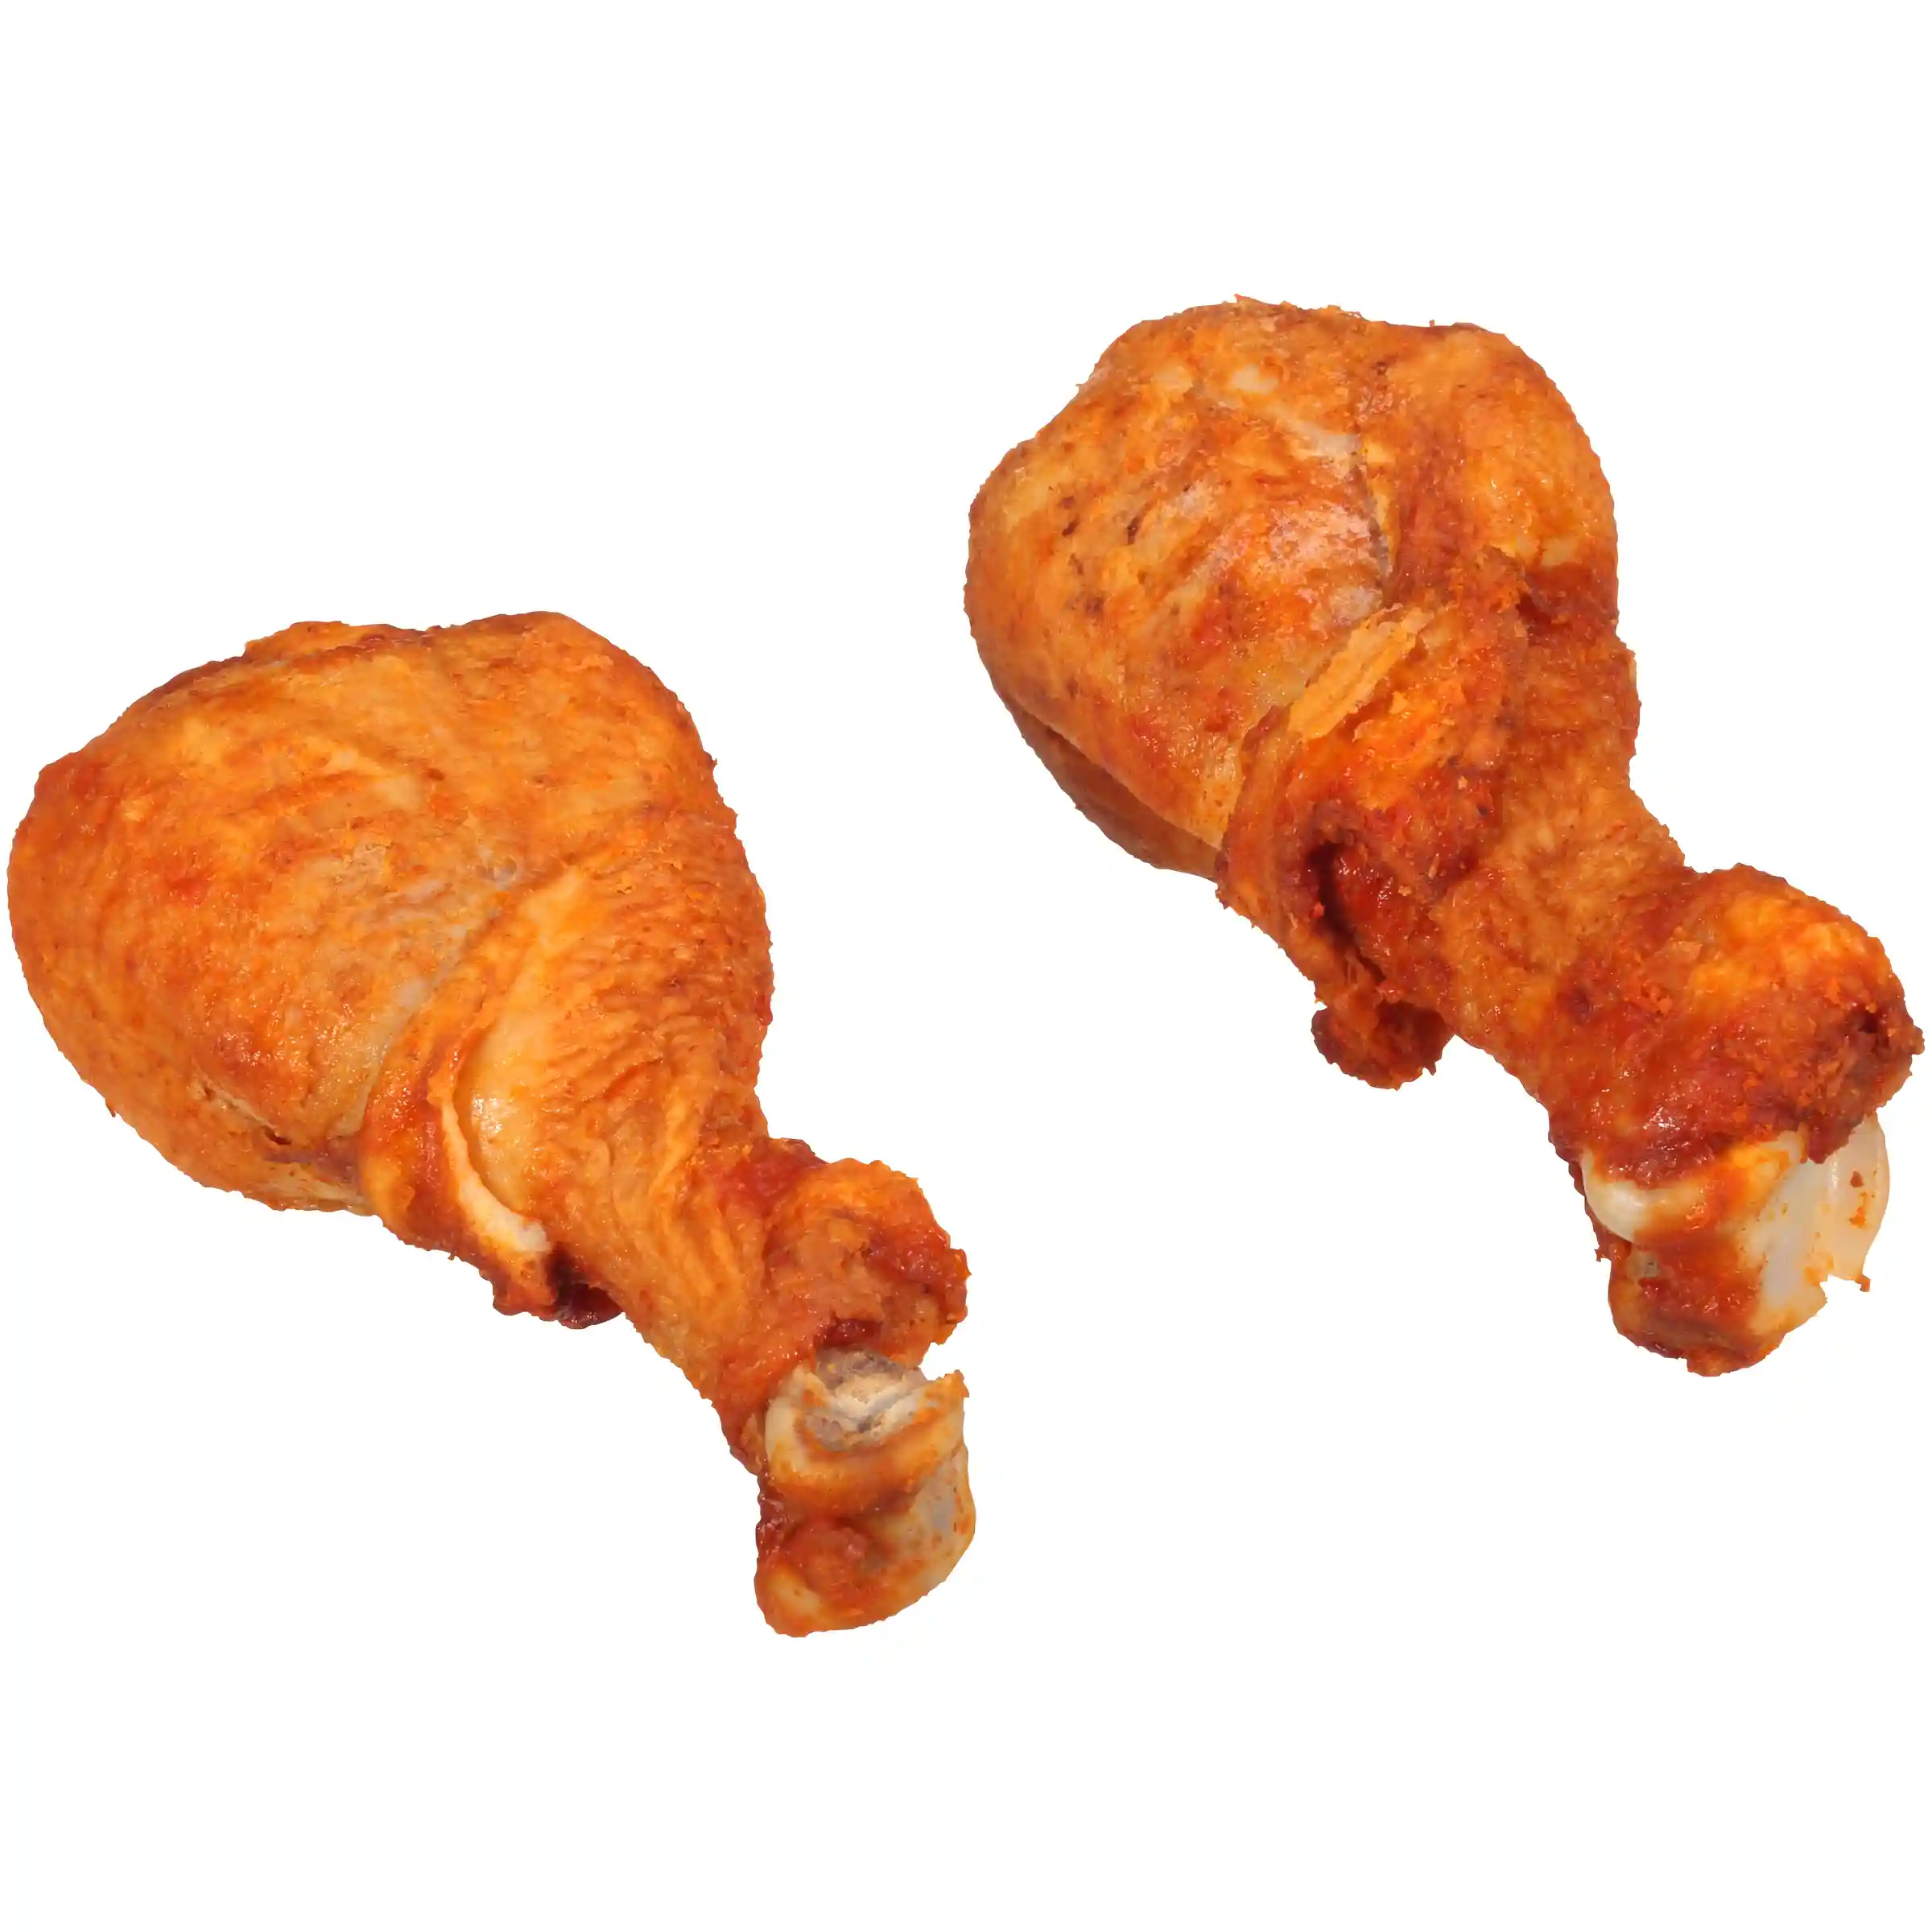 Tyson® Fully Cooked Chicken Drumsticks With Spicy Buffalo Saucehttps://images.salsify.com/image/upload/s--3i7keqUR--/q_25/i6ib33rlhk28w8ghzdug.webp